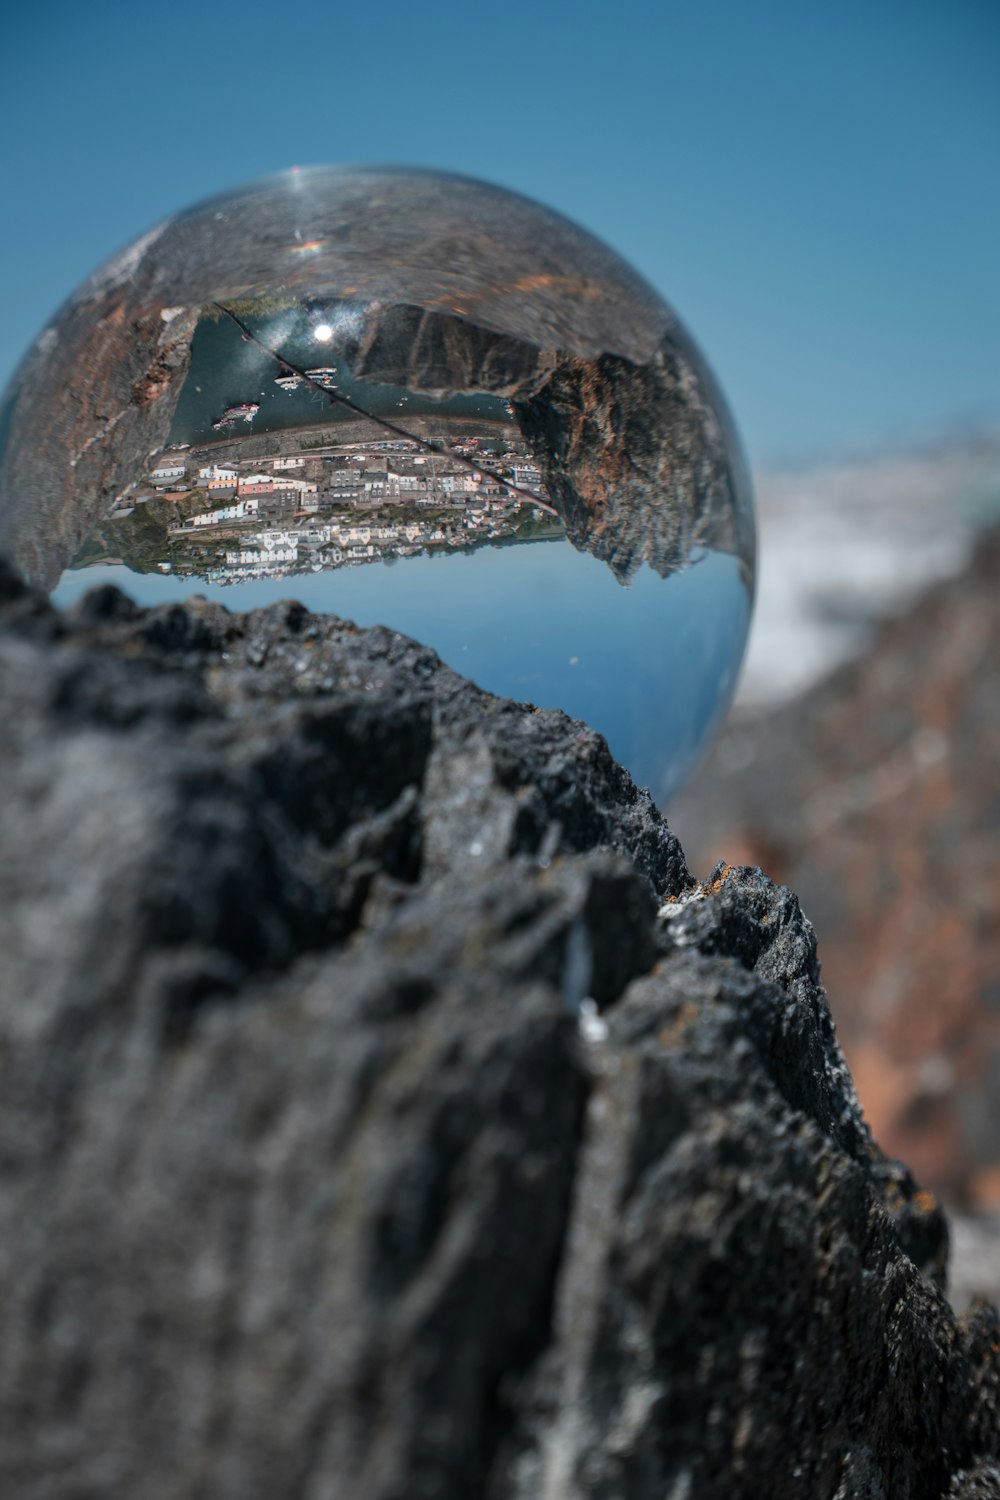 a glass ball sitting on top of a rock